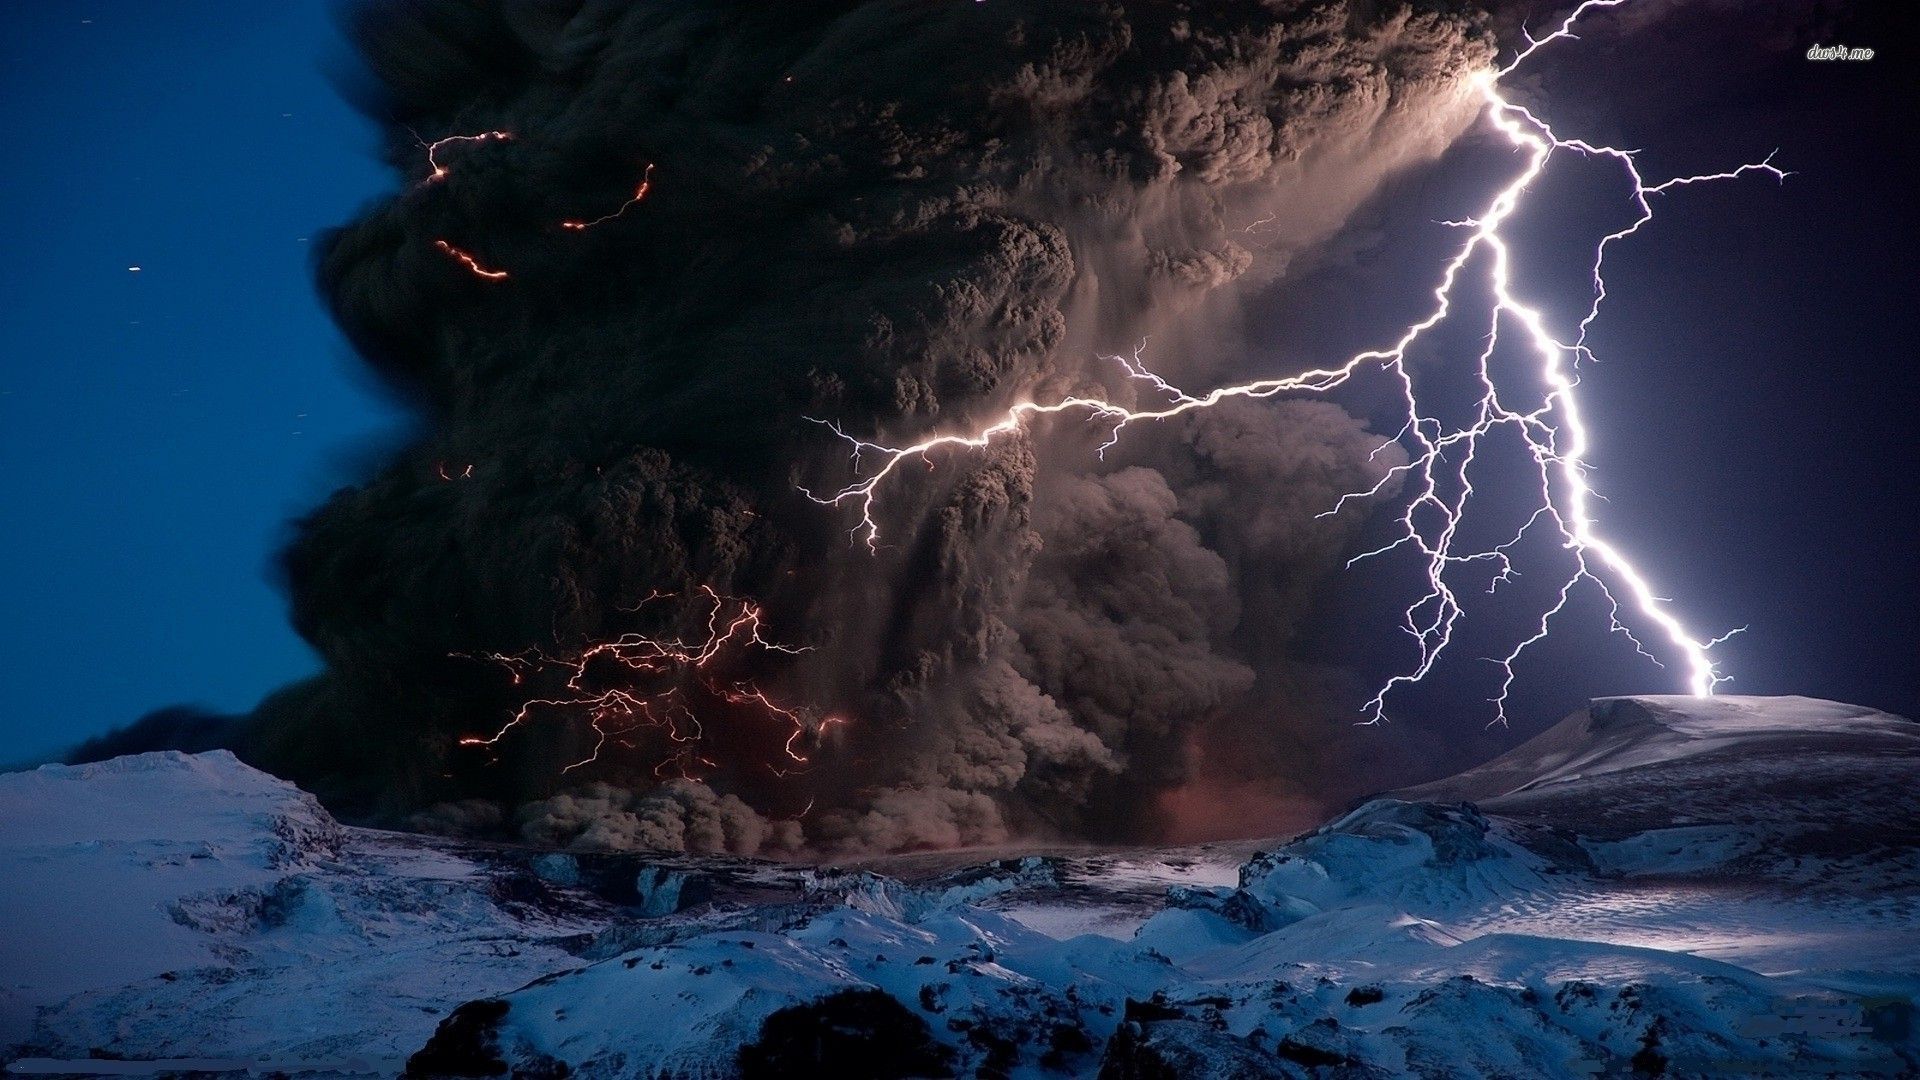 Apocalyptic storm over the volcano wallpaper - Nature wallpapers ...